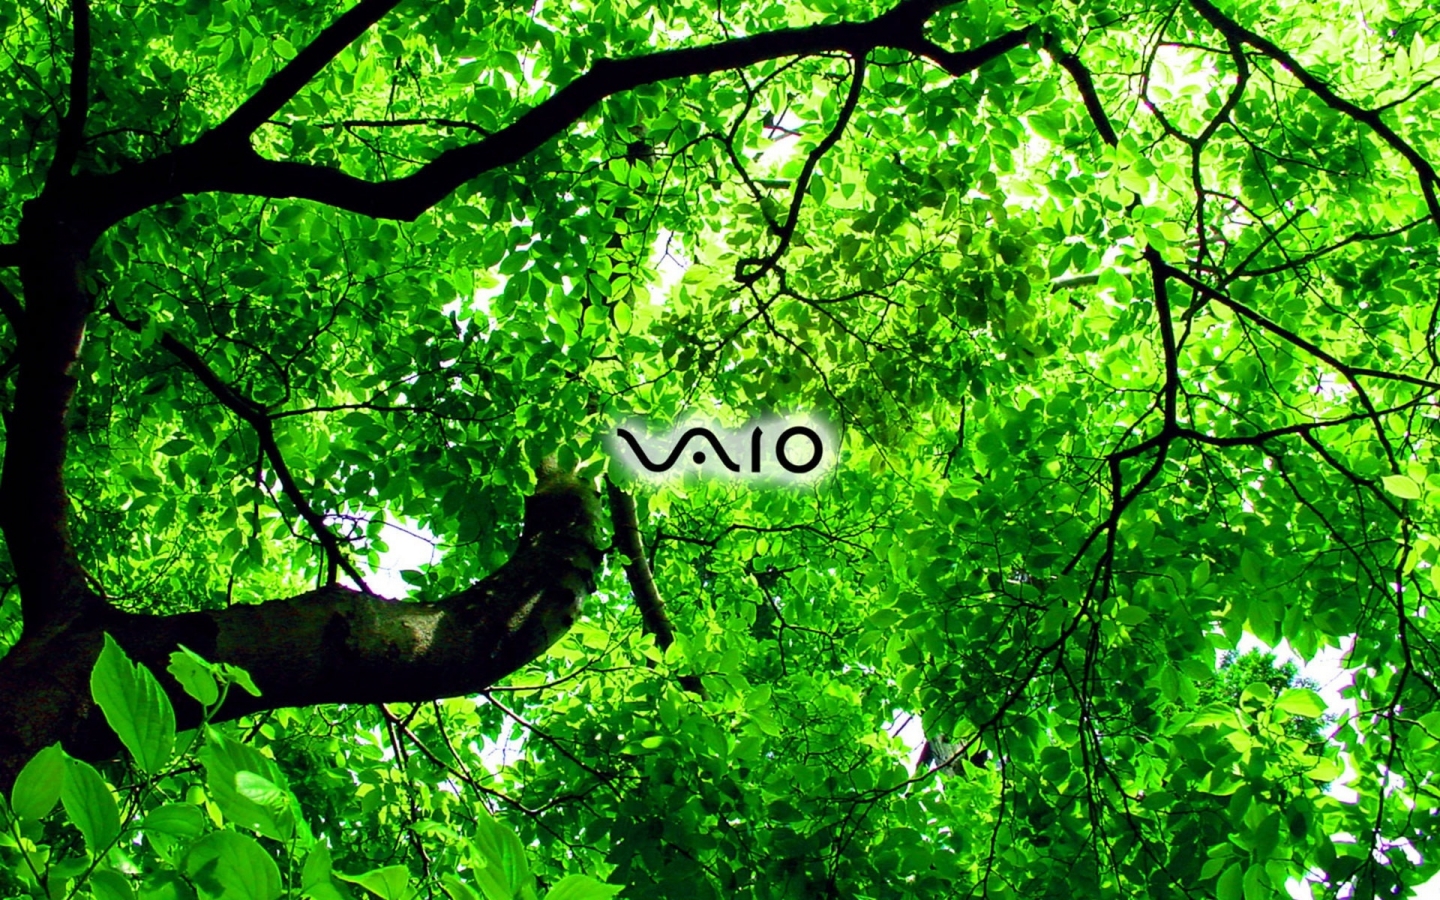 Sony Vaio green for 1440 x 900 widescreen resolution